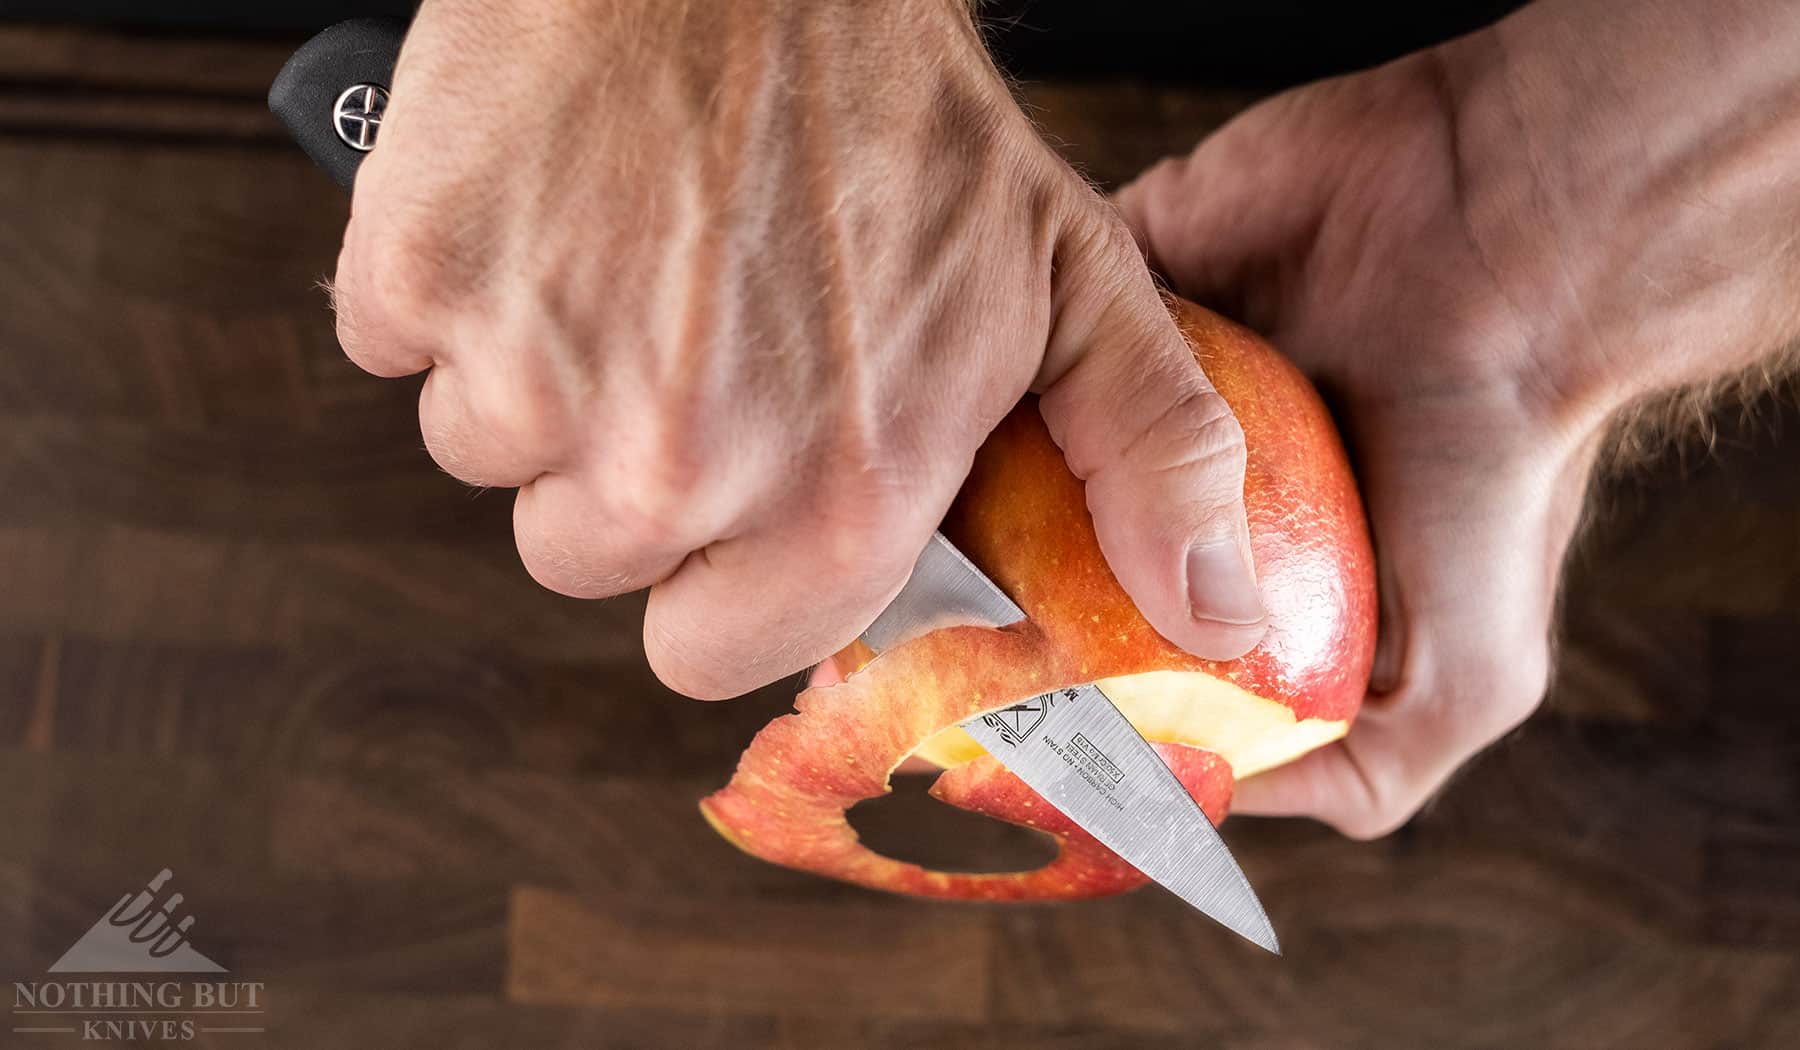 The Mercer Genesis paring knife peeling an apple to show it's great cutting and peeling ability.